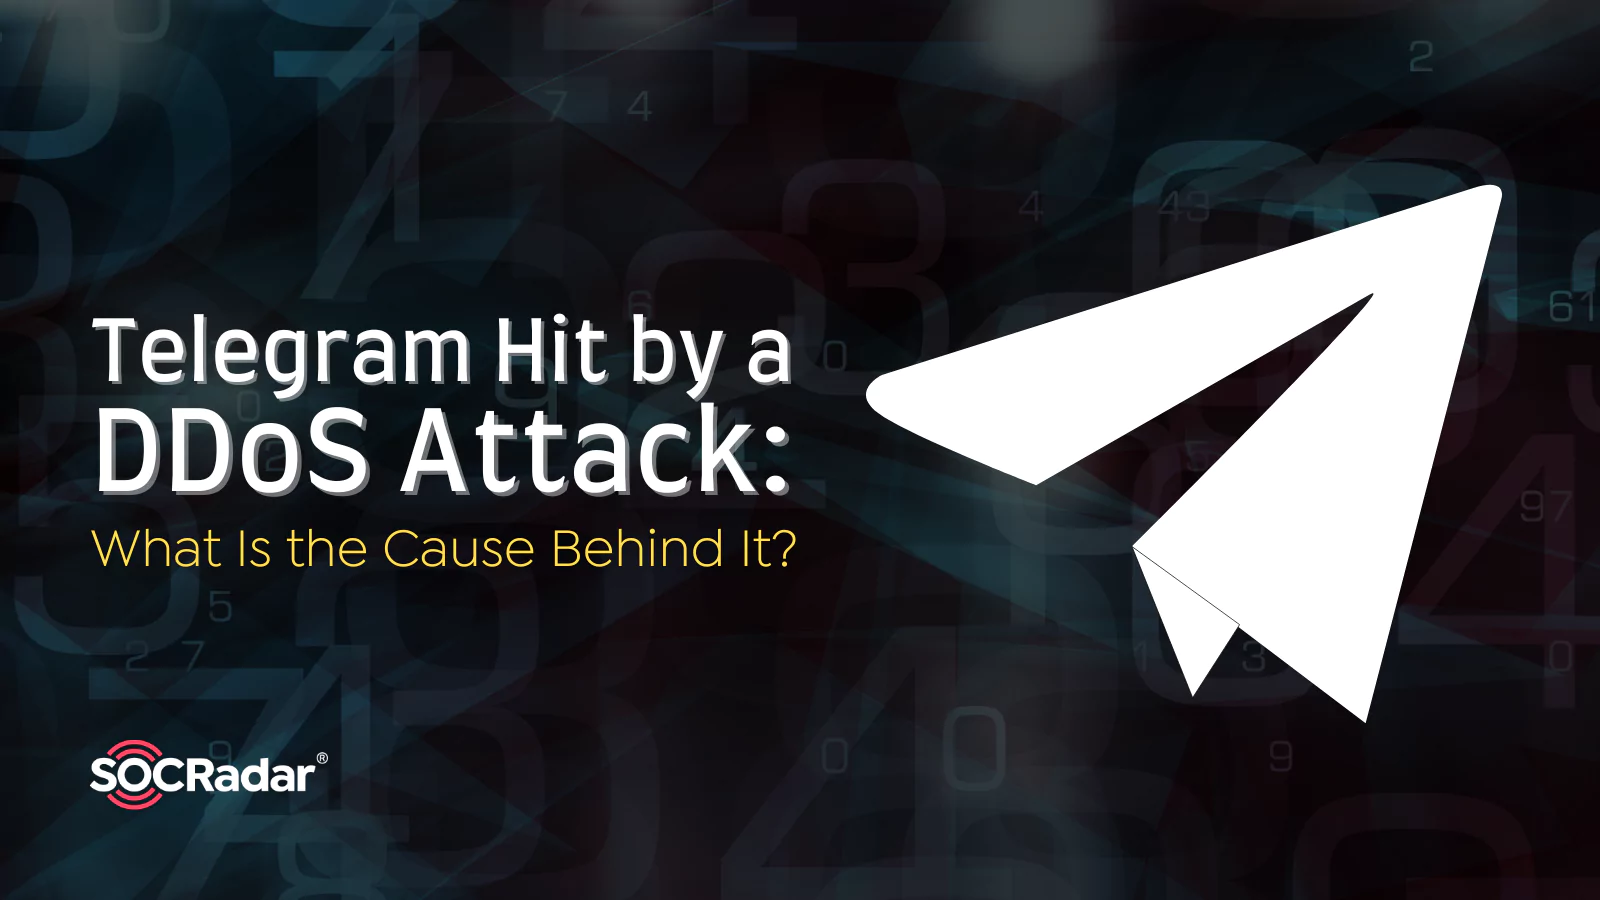 SOCRadar® Cyber Intelligence Inc. | Telegram Hit by a DDoS Attack: What Is the Cause Behind It?